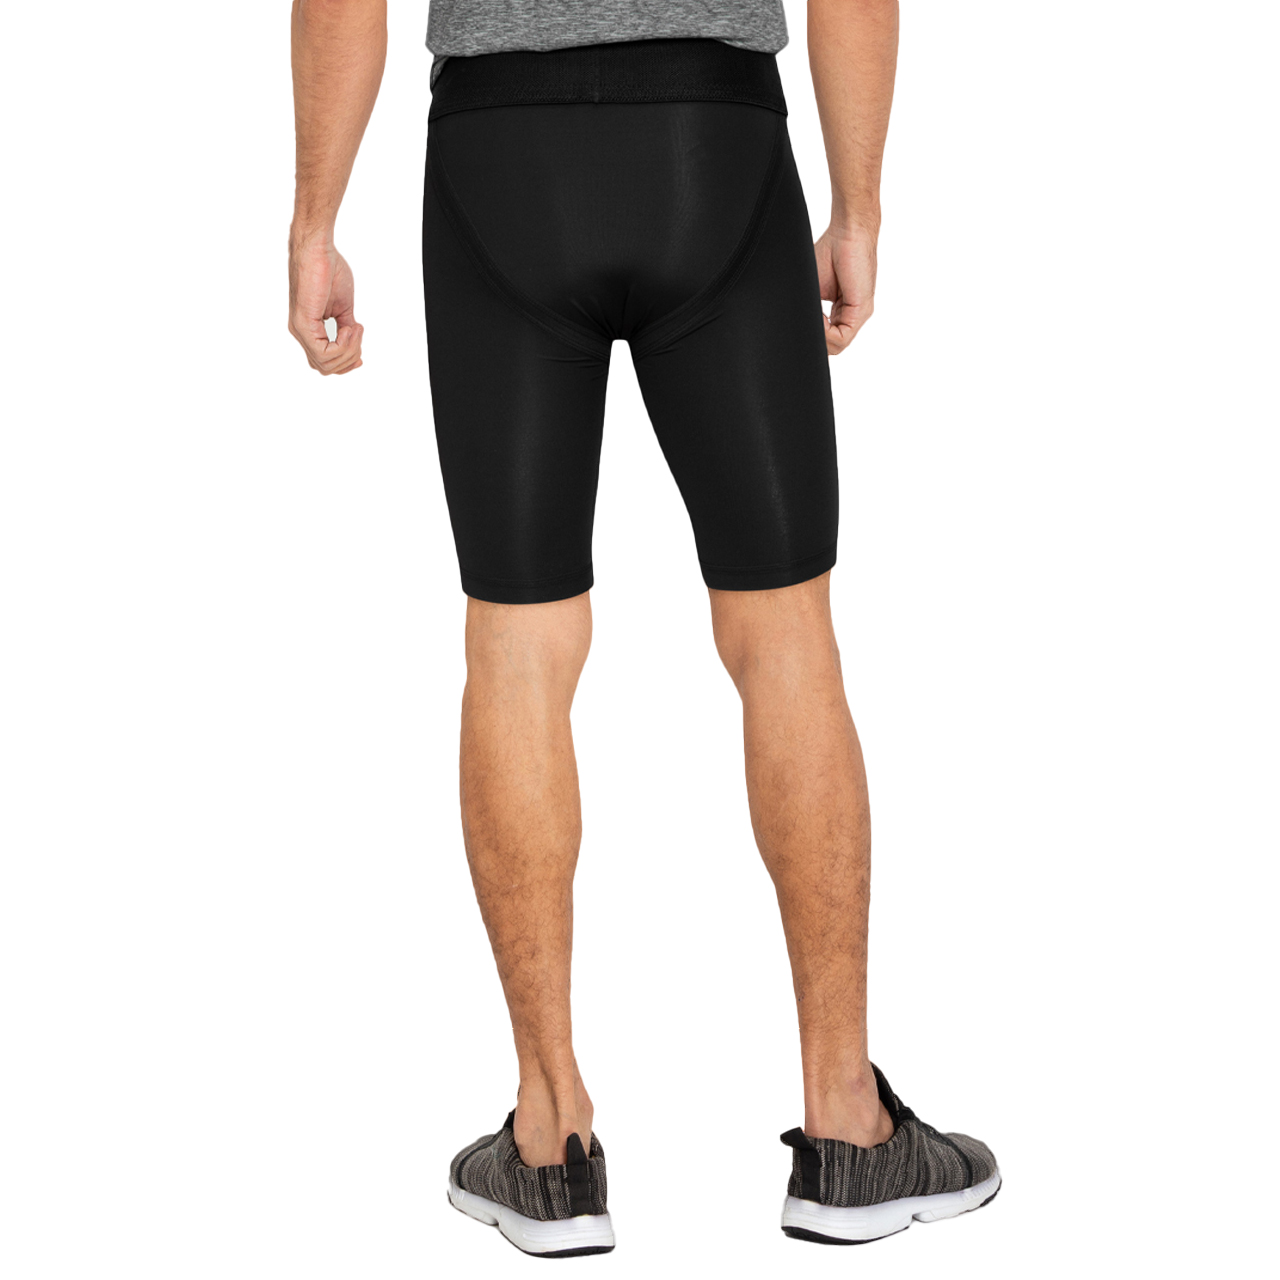 Spandex Youth Compression Supporter Shorts ~ Womanly Manly Activewear